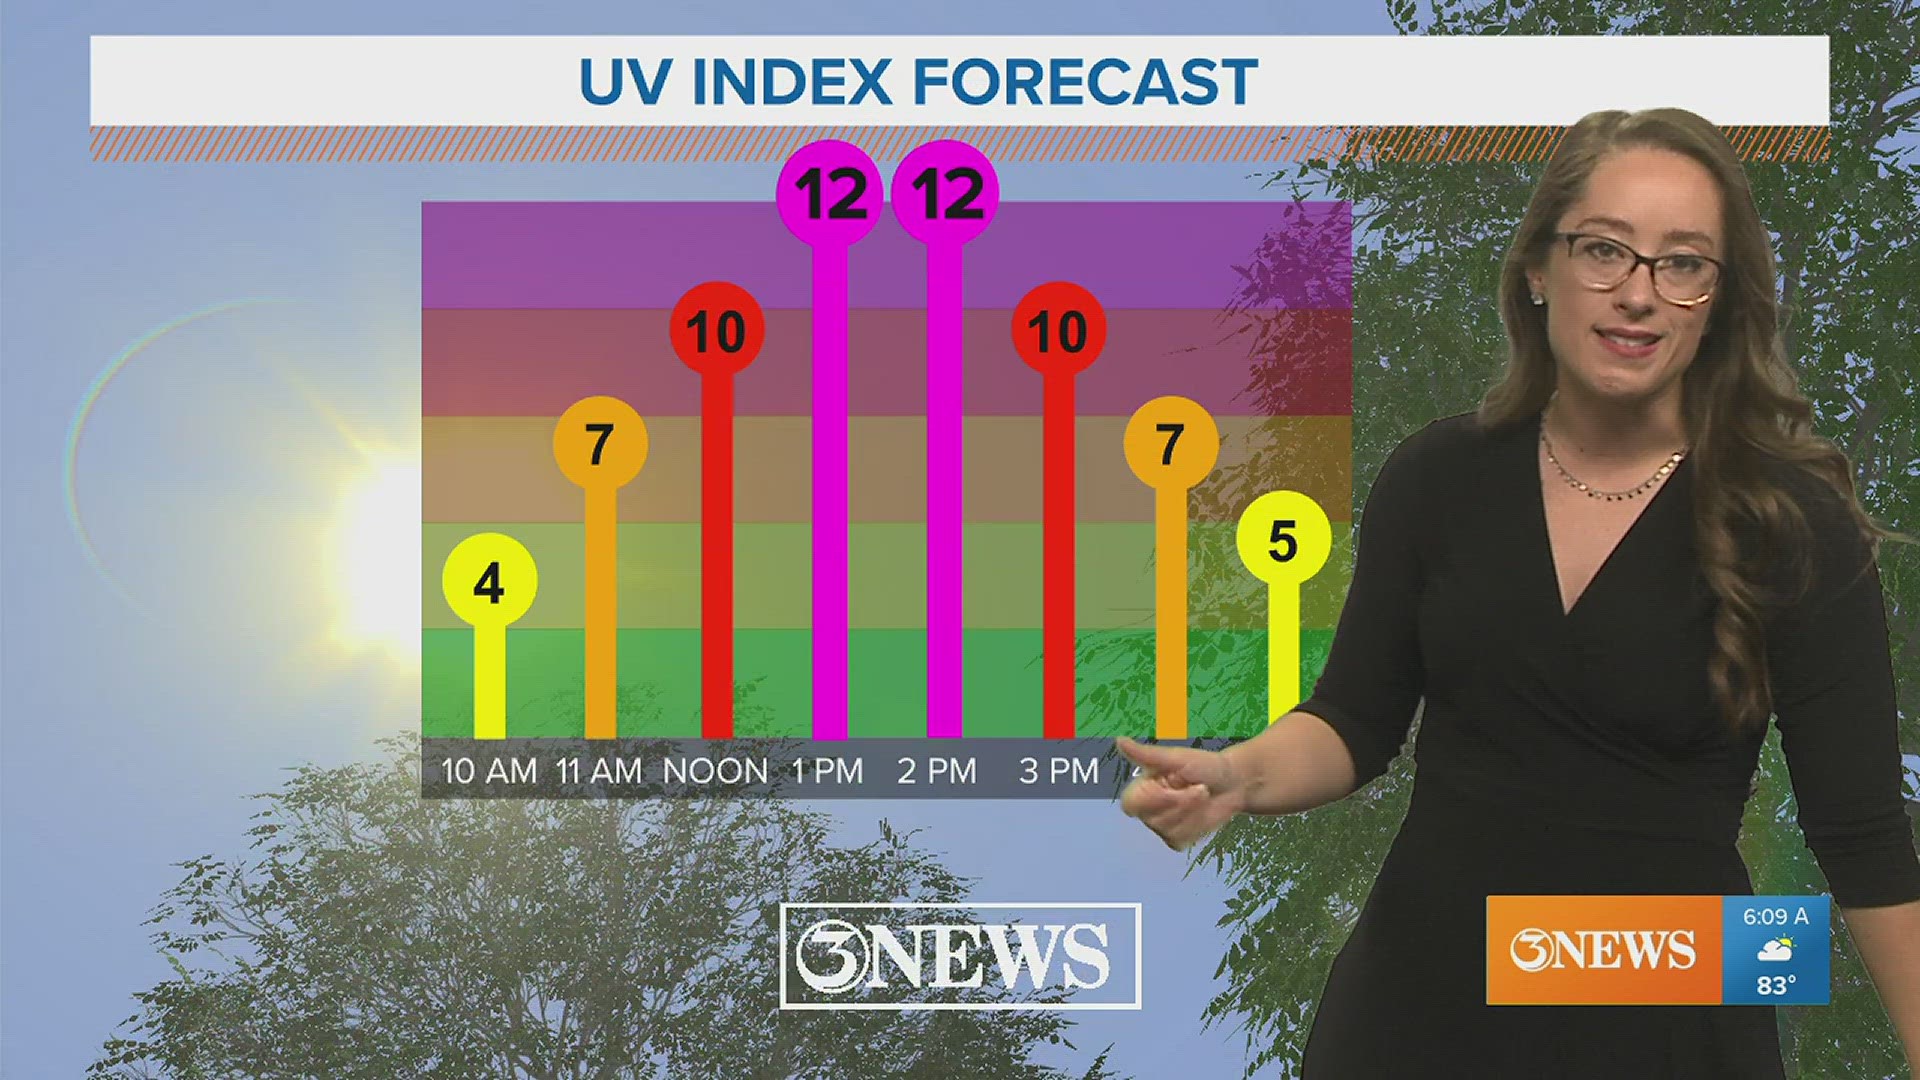 Extreme UV index, moderate rip current risk, waist high waves, and breezy conditions